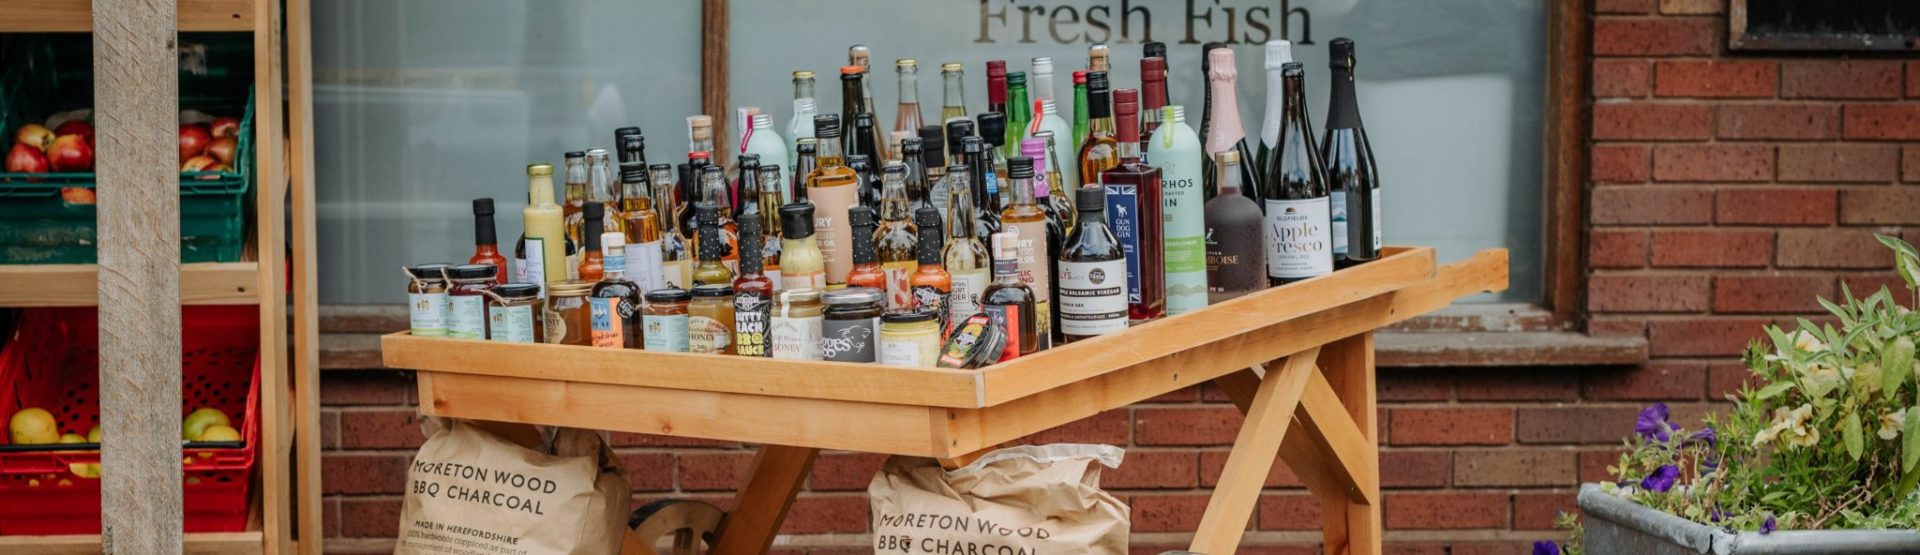 Herefordshire products and produce